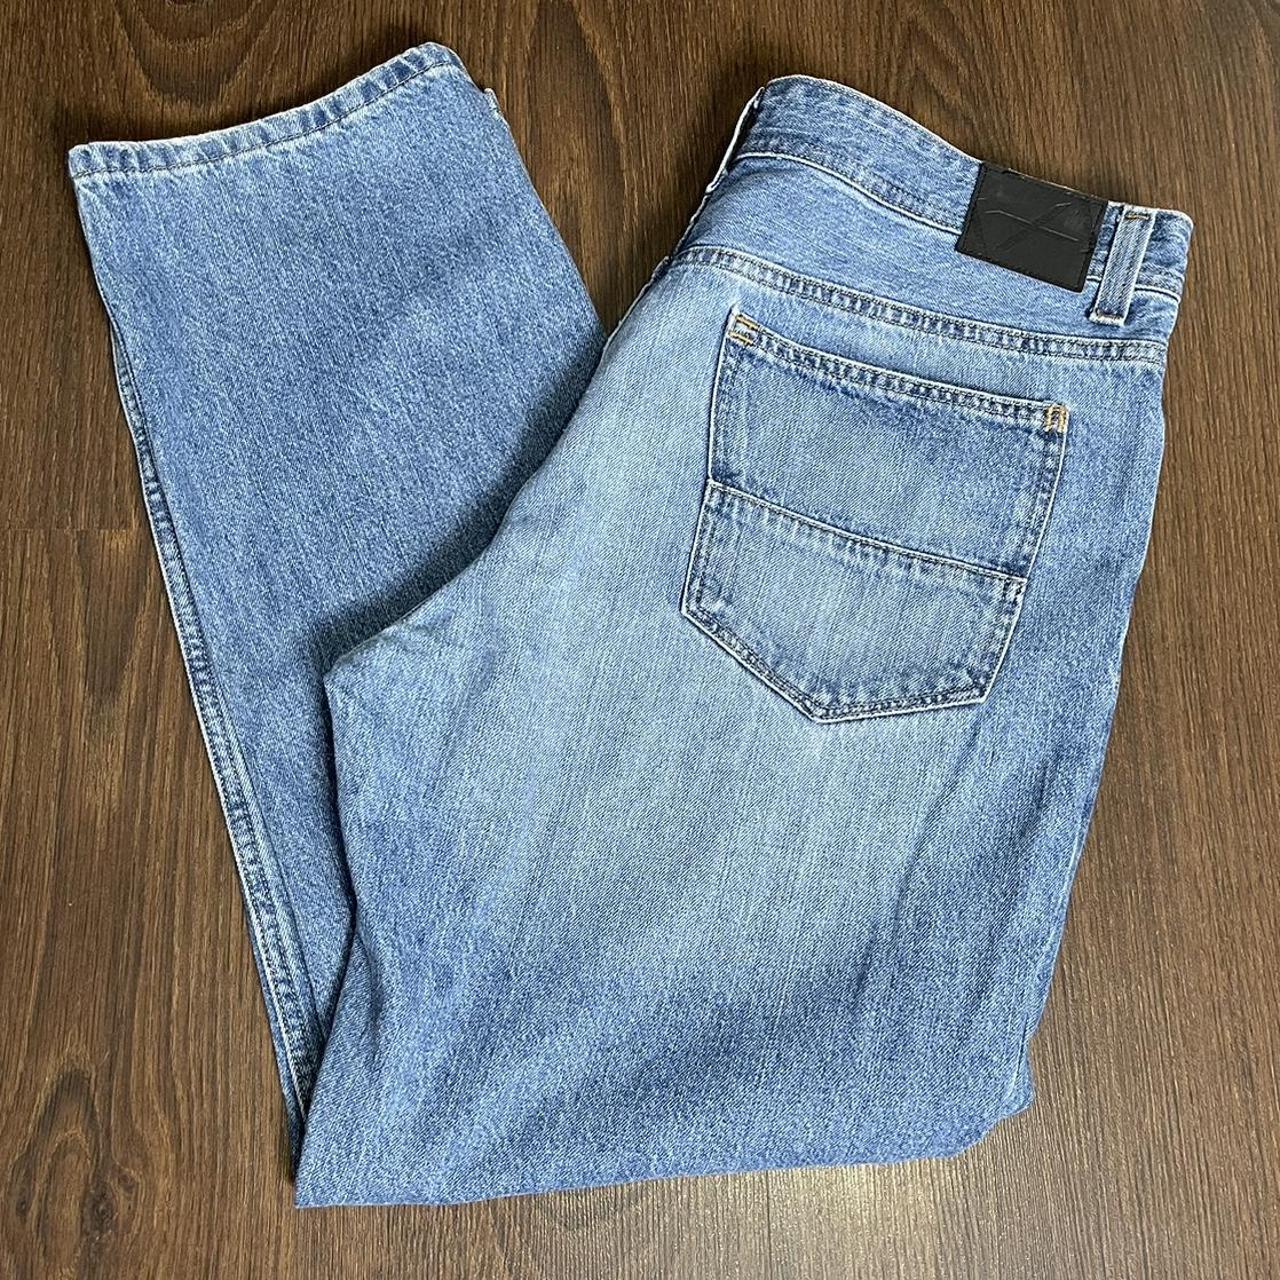 Men’s Axis Jeans Size 38X29, Get your hands on... - Depop